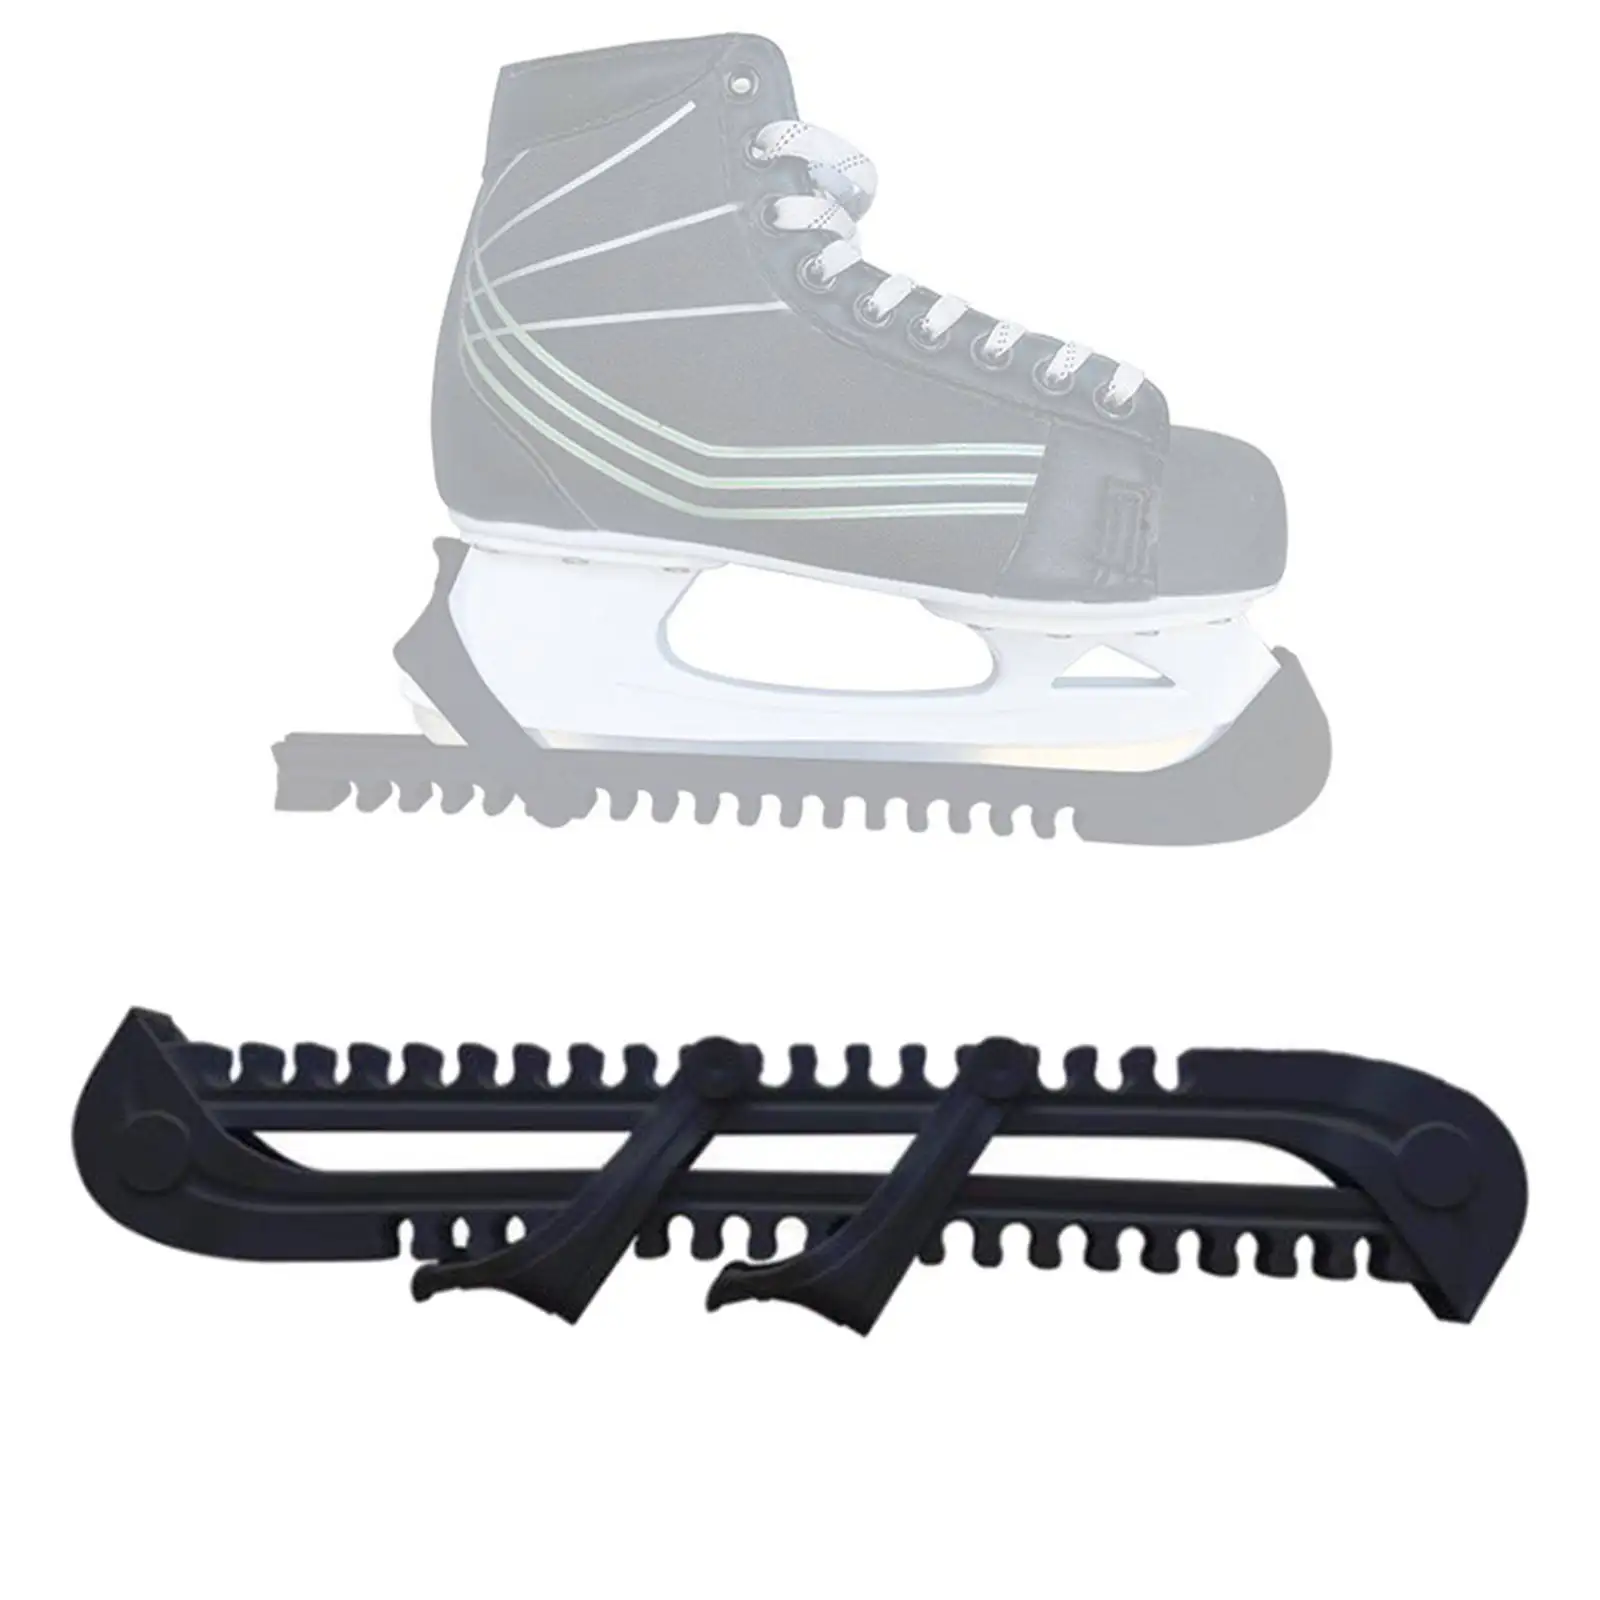 Skate Blade Guards Spare Parts Adjustable Accessories Universal Ice Figure Skating Blade Covers